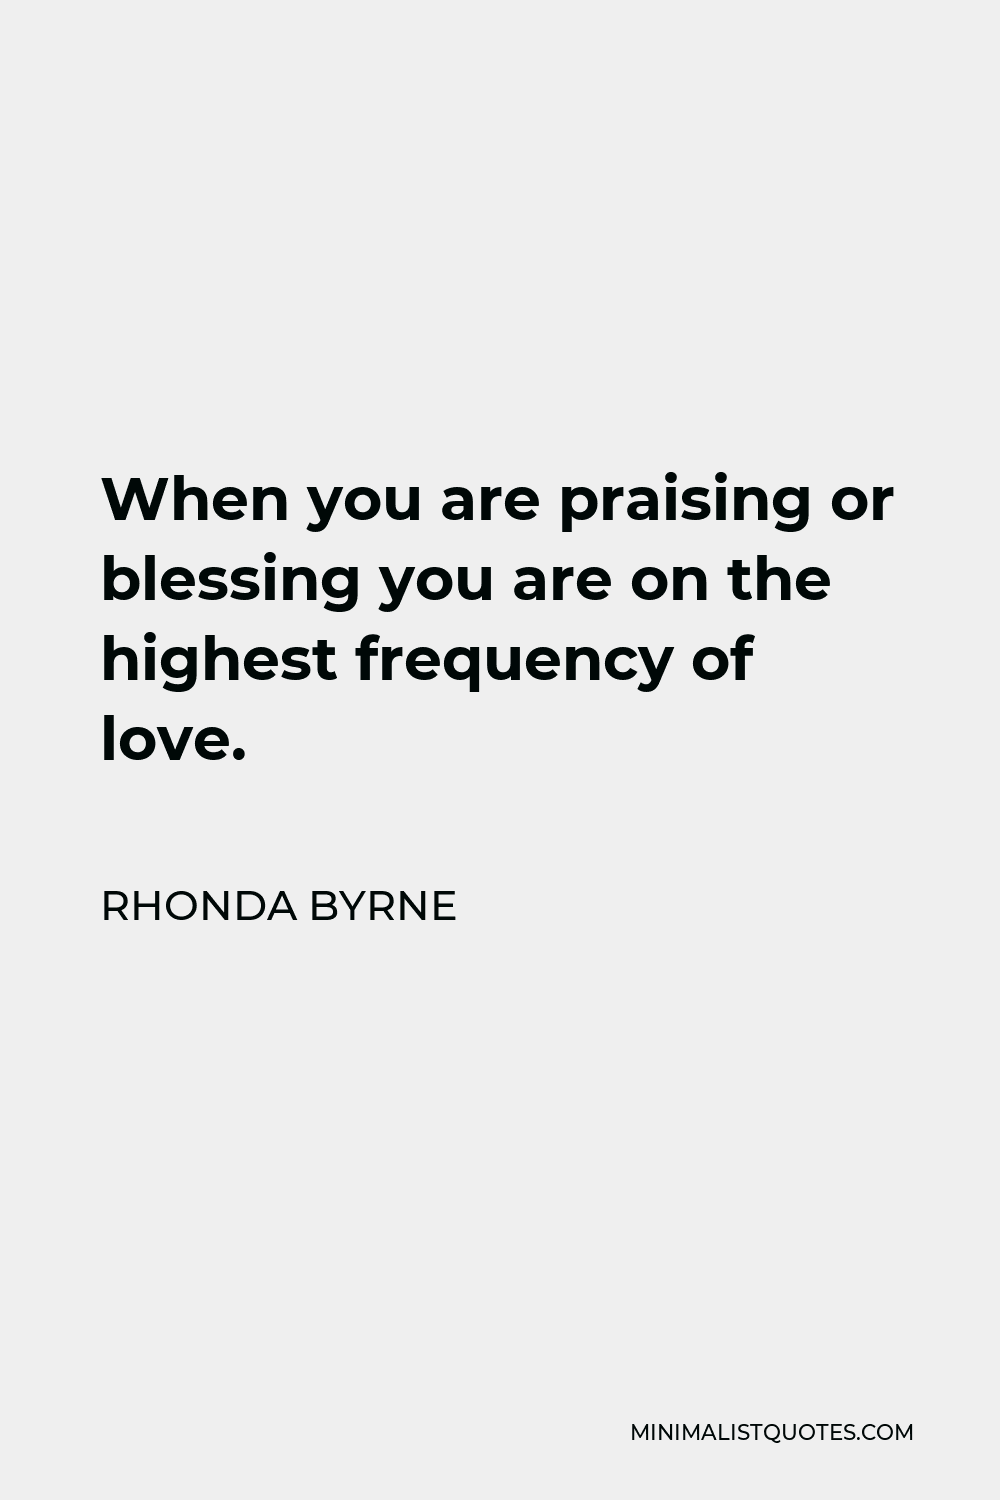 Rhonda Byrne Quote - When you are praising or blessing you are on the highest frequency of love.